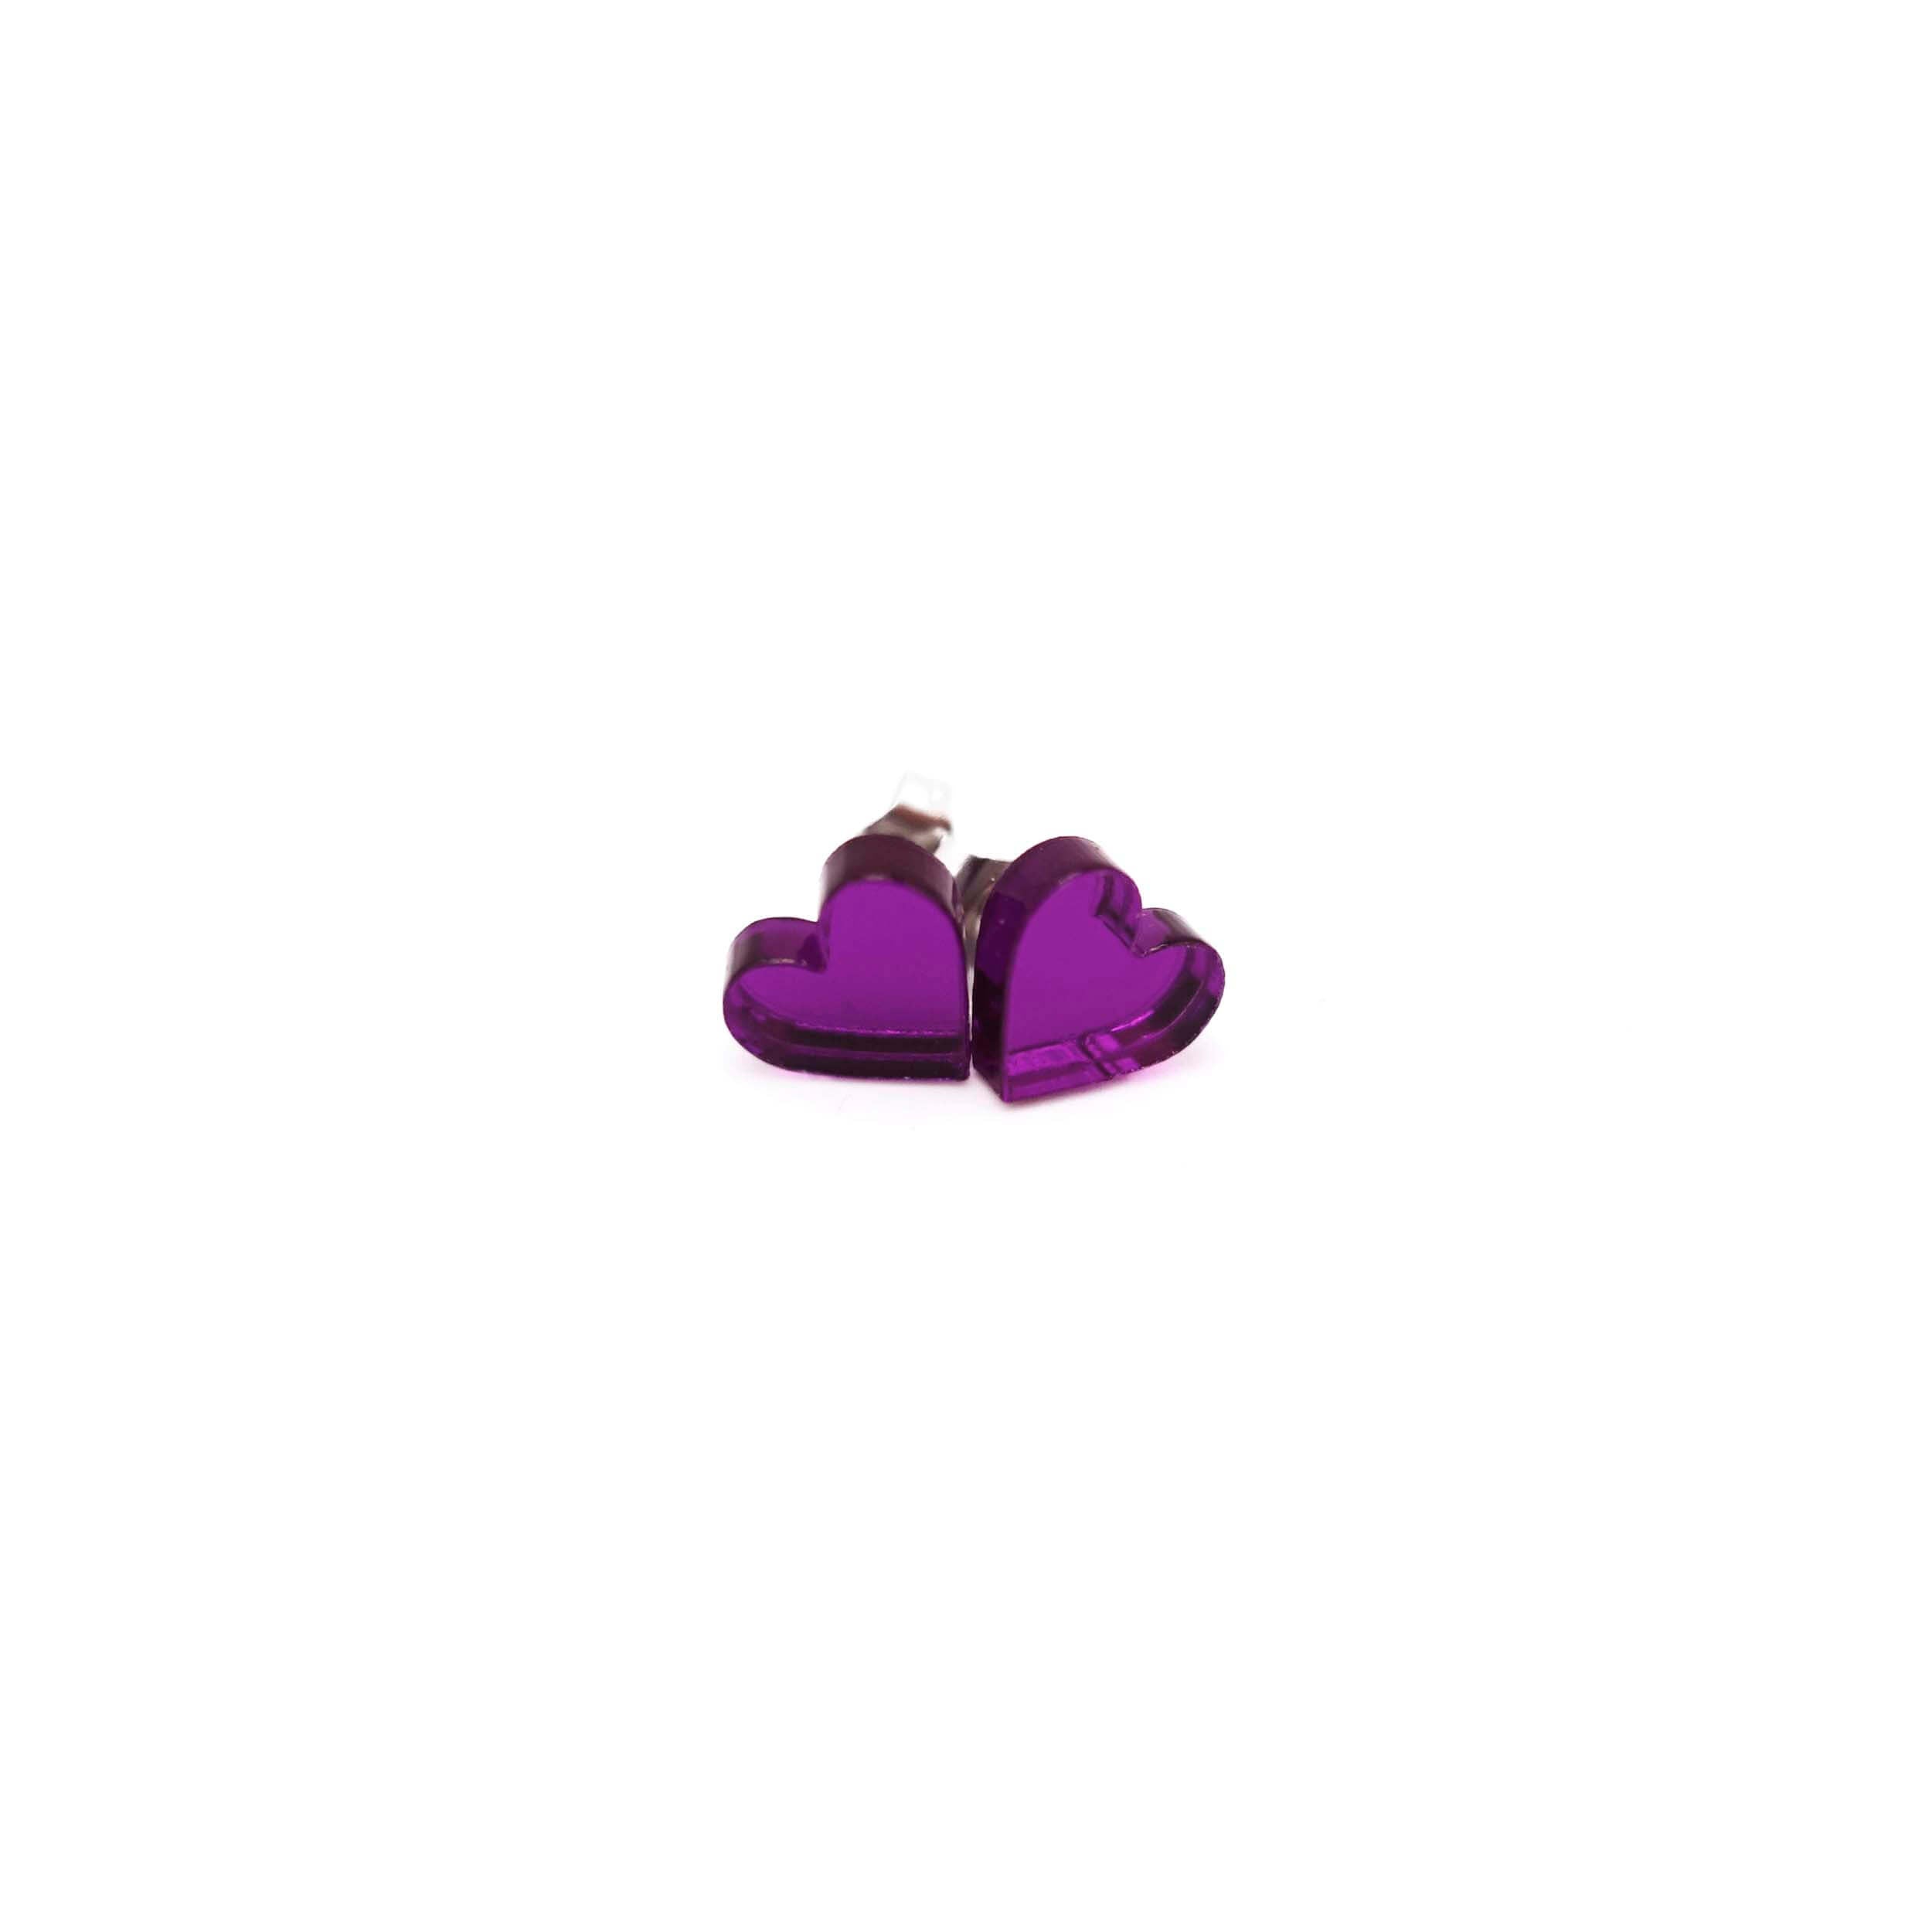 Poison purple mirror tiny heart stud earrings shown on a white background. 